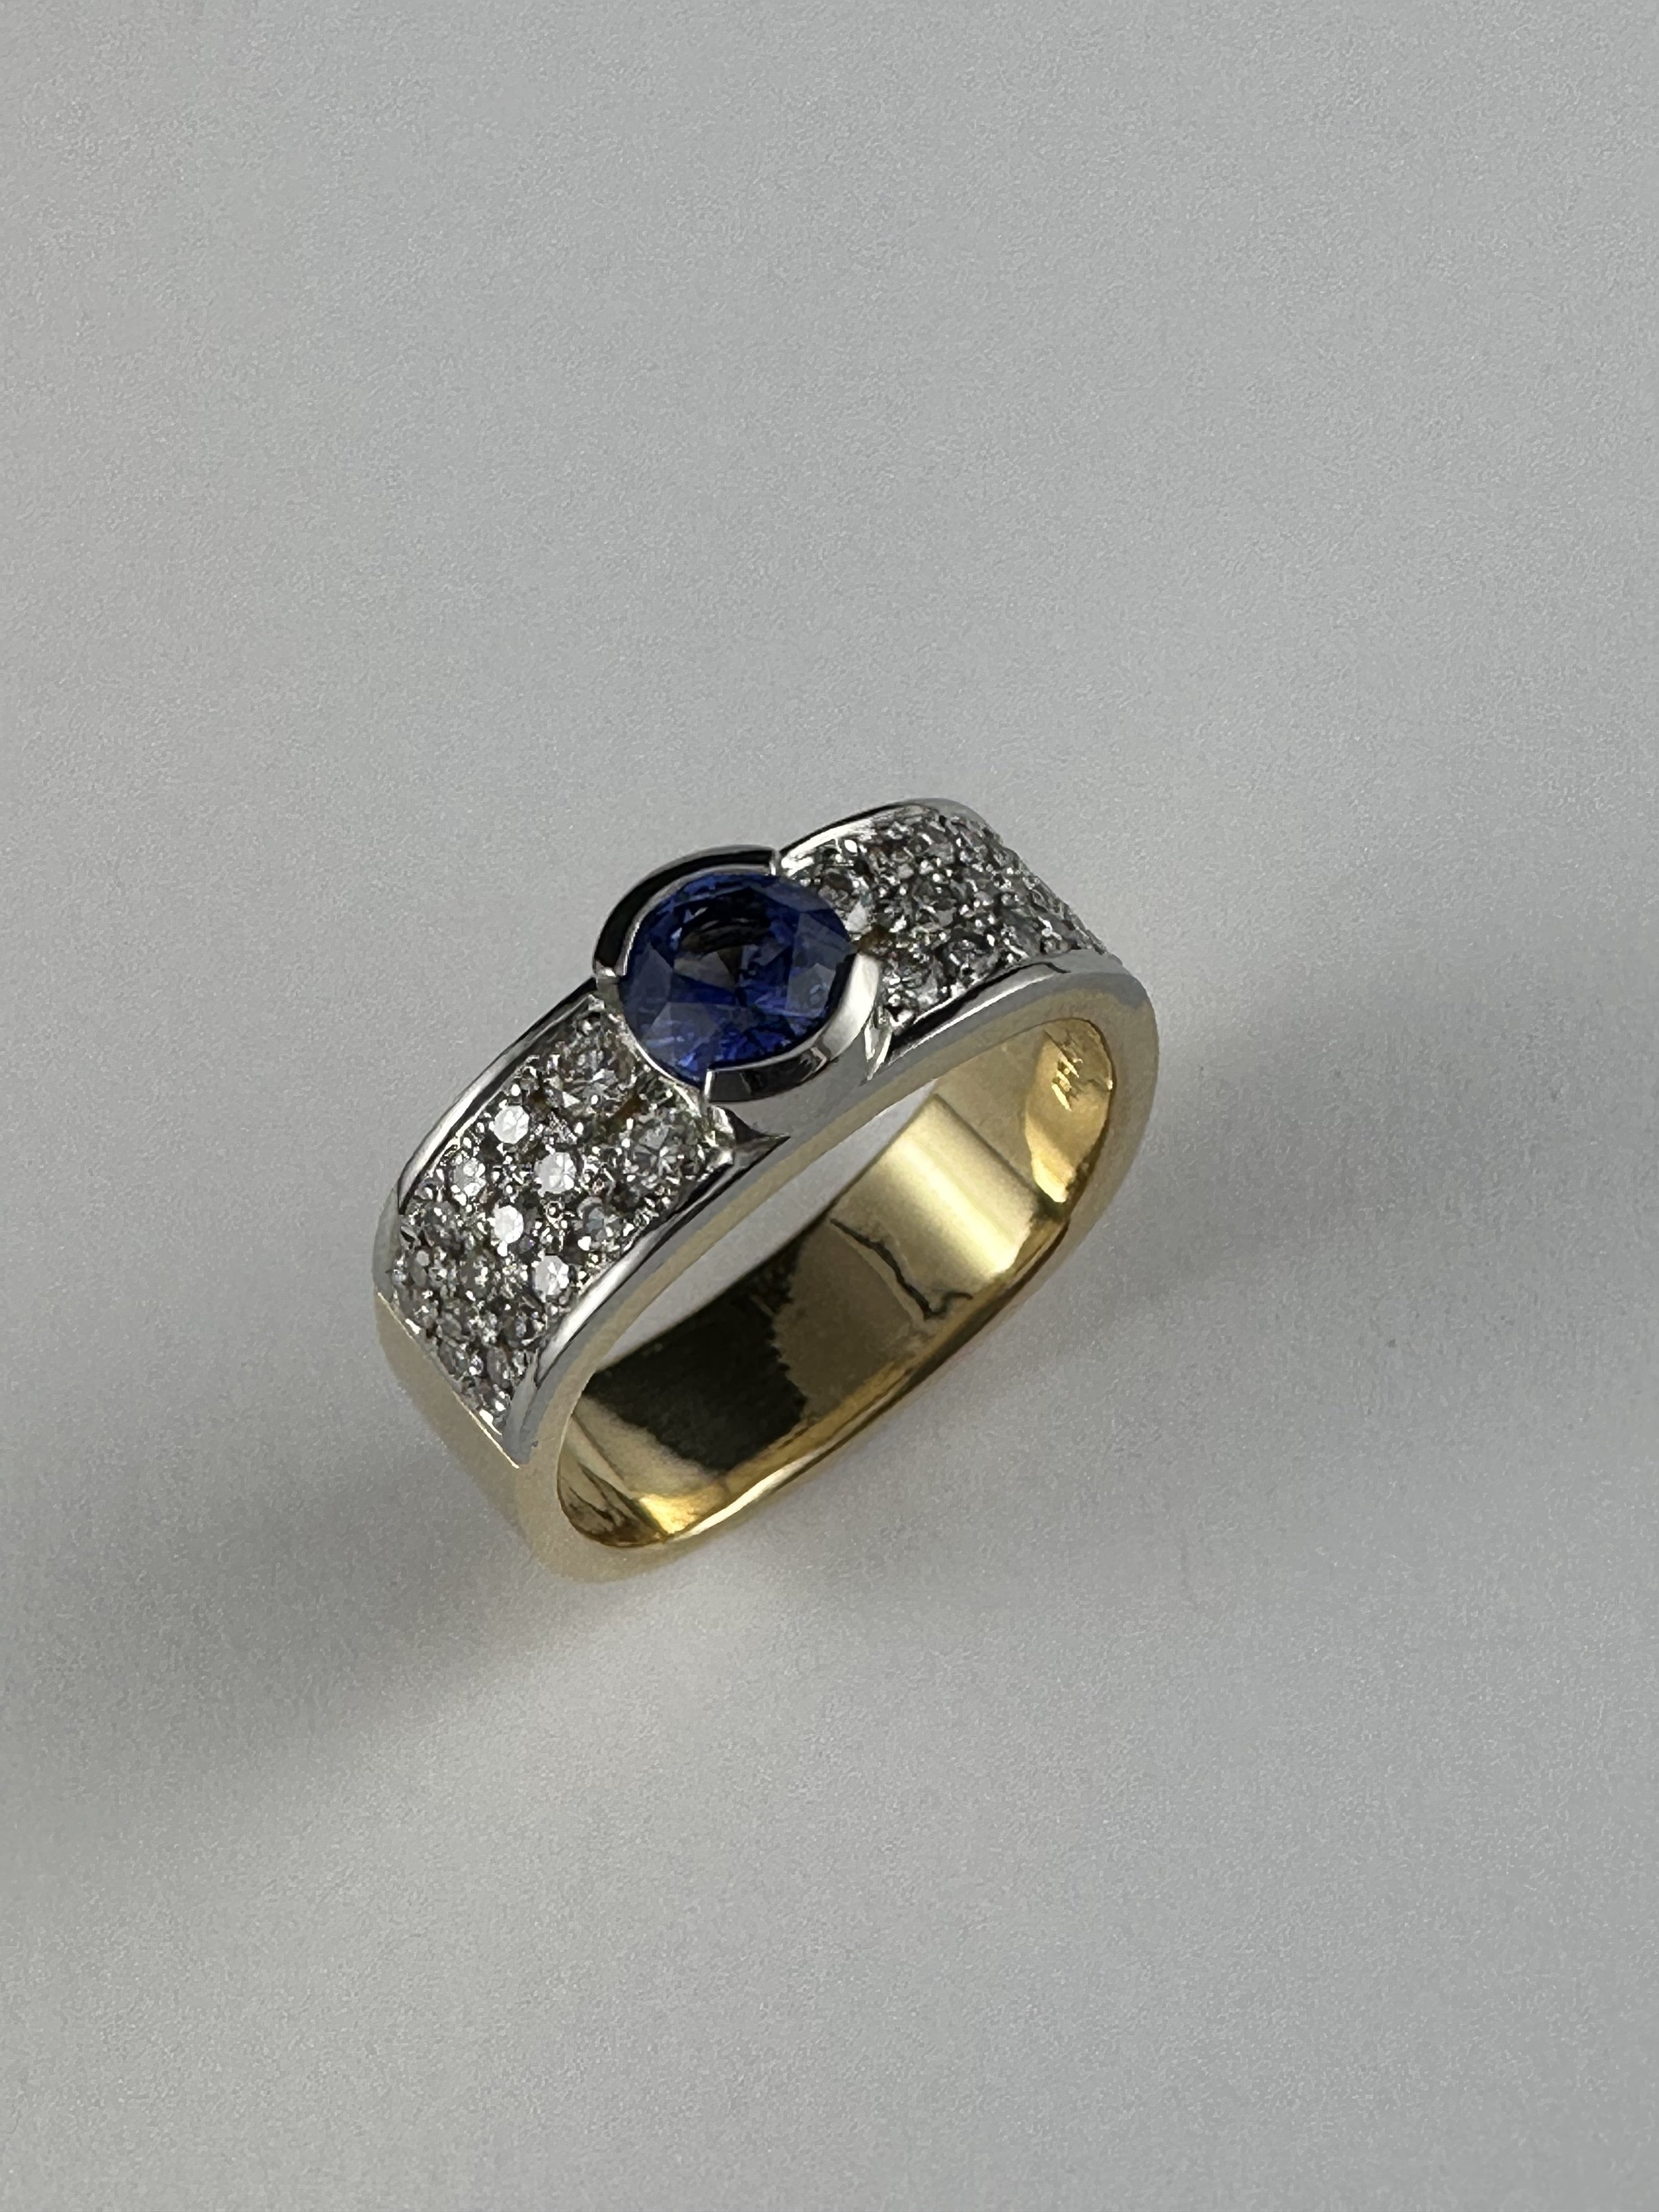 19K White and 18K Yellow Gold Sapphire and Diamond Ring